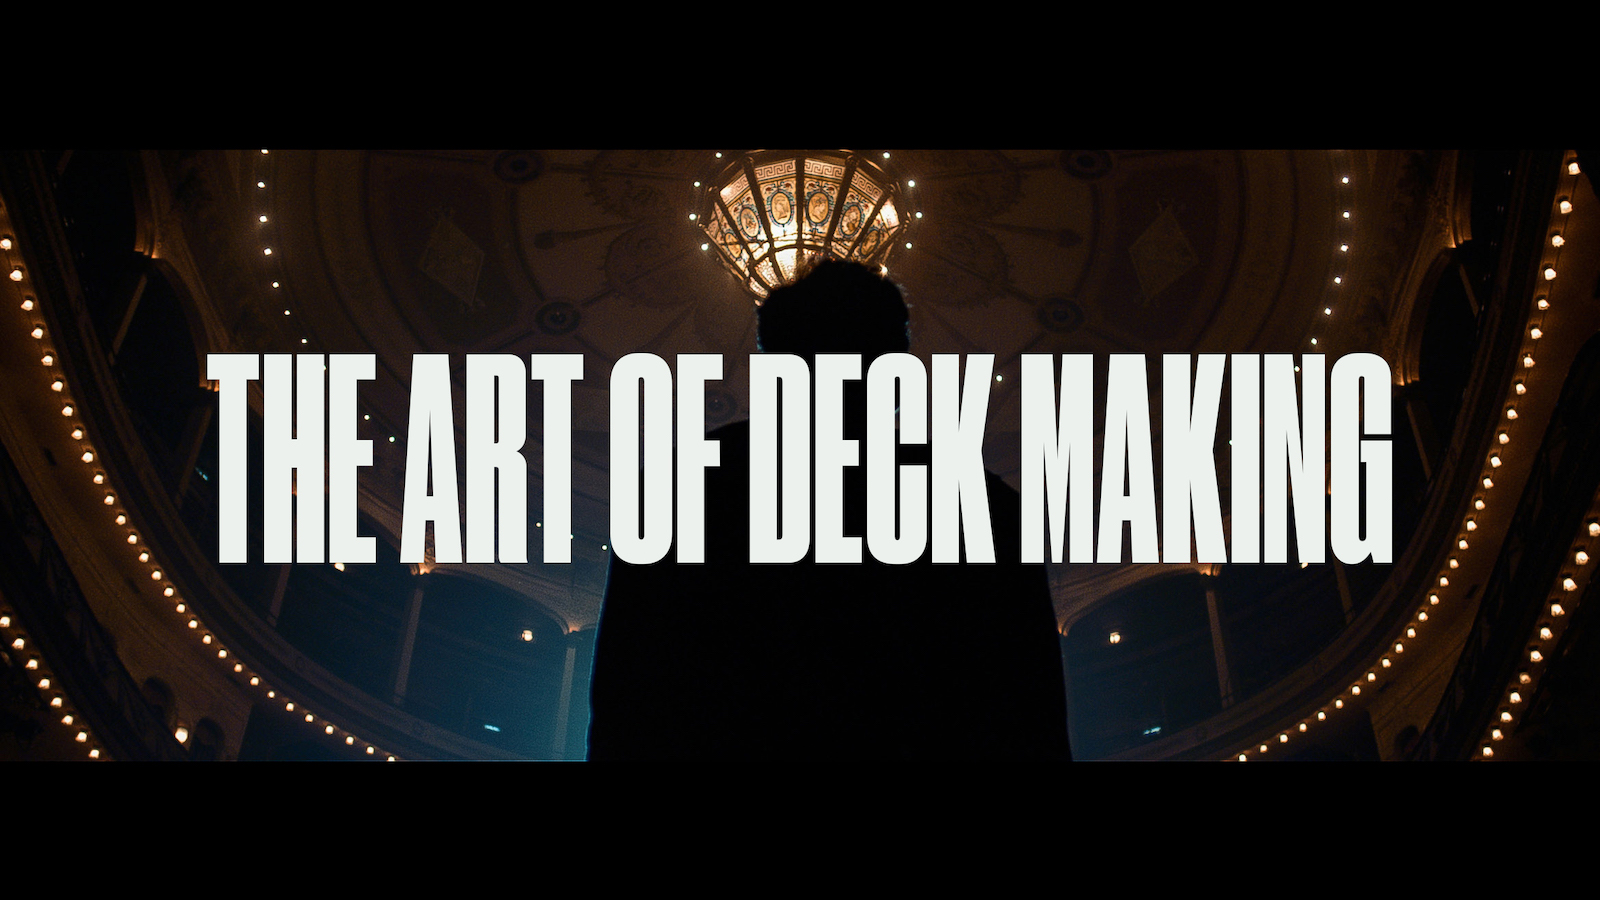 THE ART OF DECK MAKING